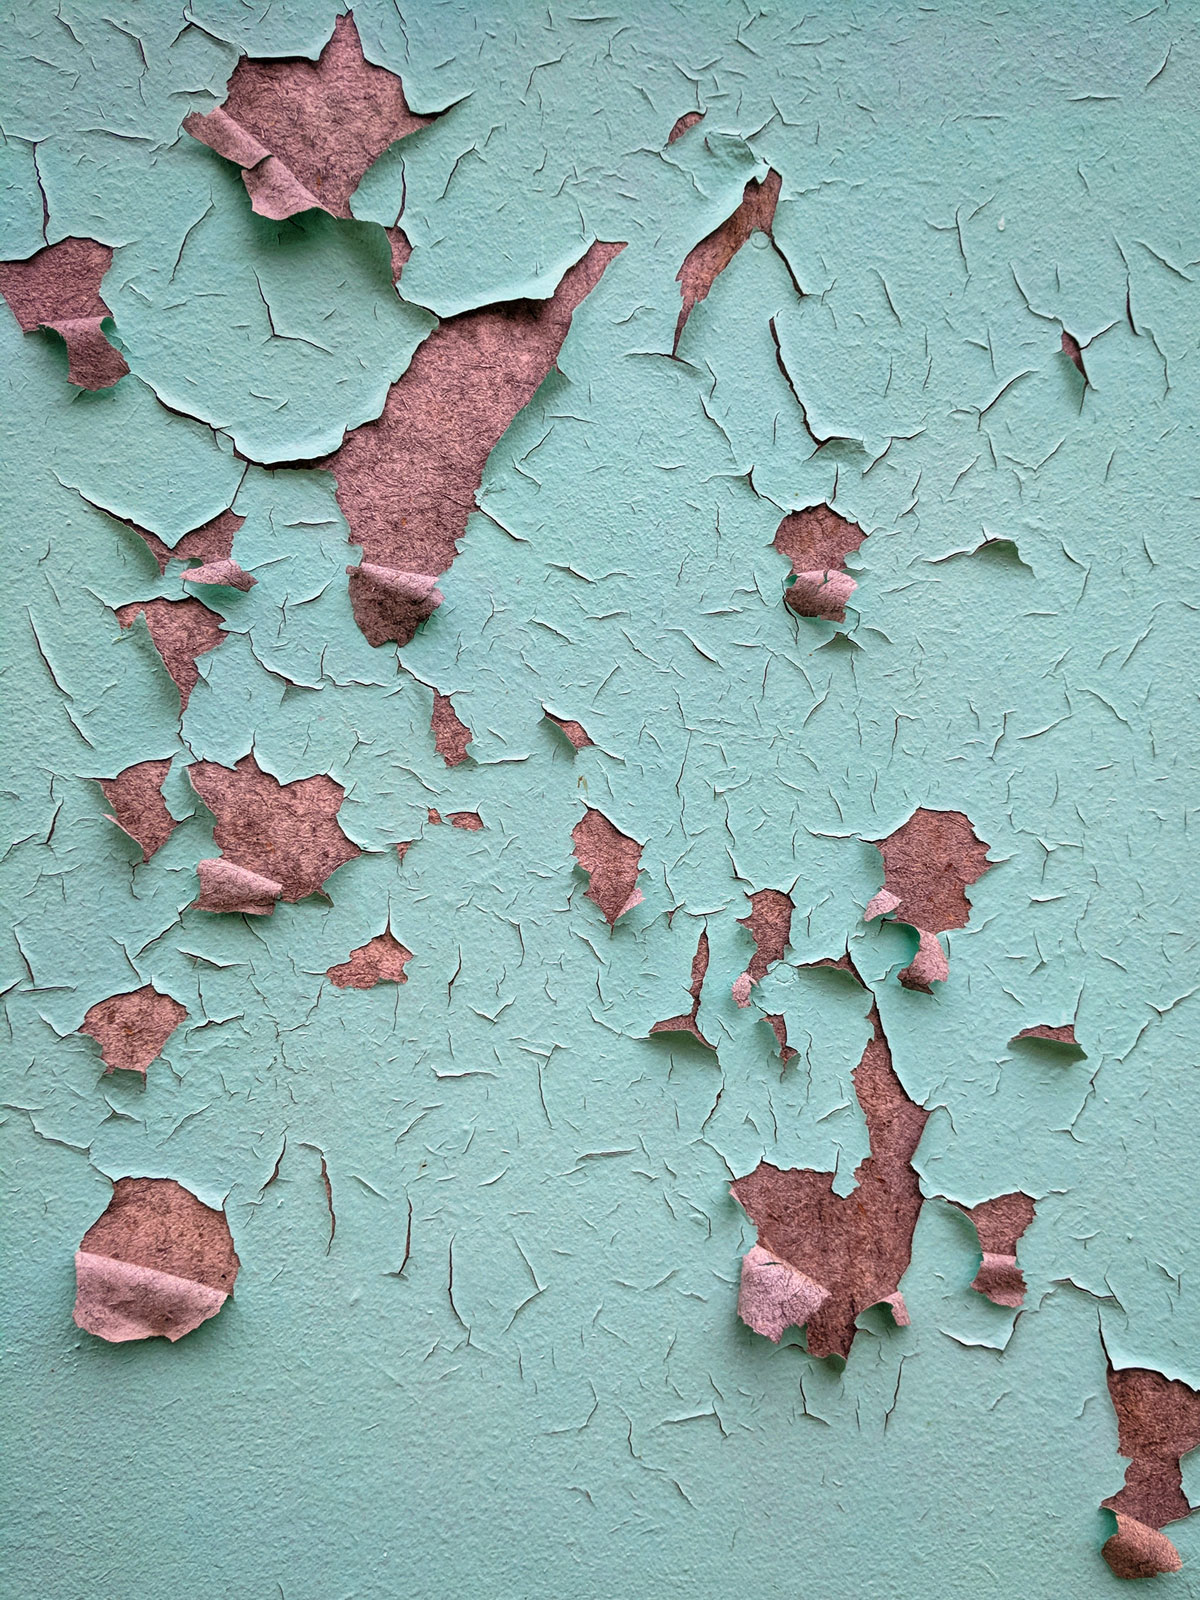 Peeling Paint – Courtney Celley